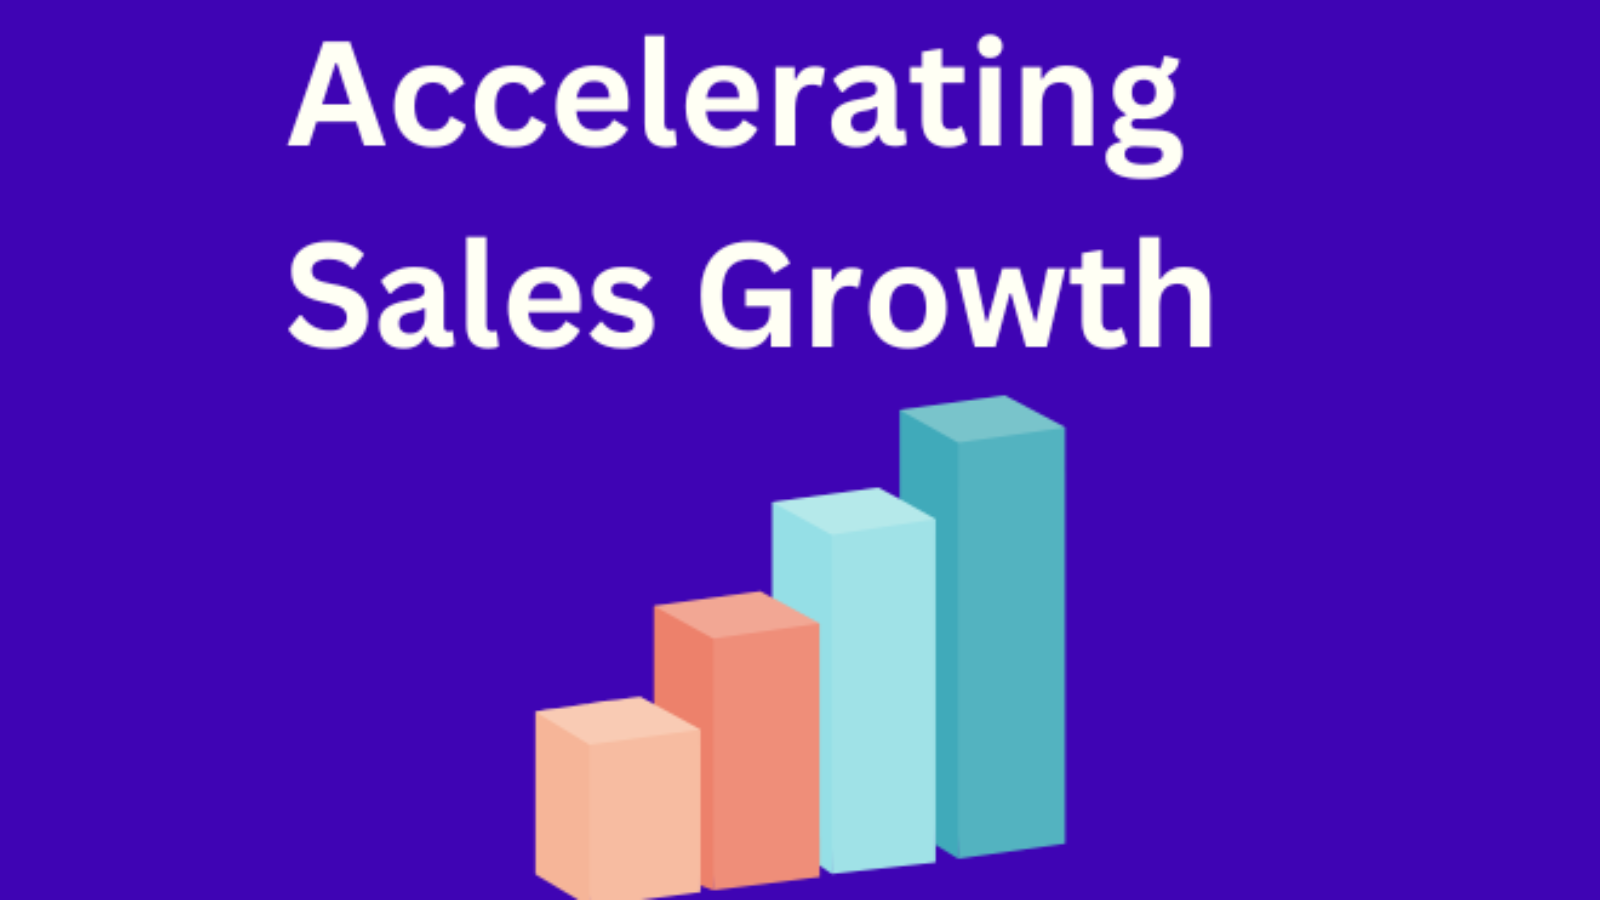 Accelerating Sales Growth